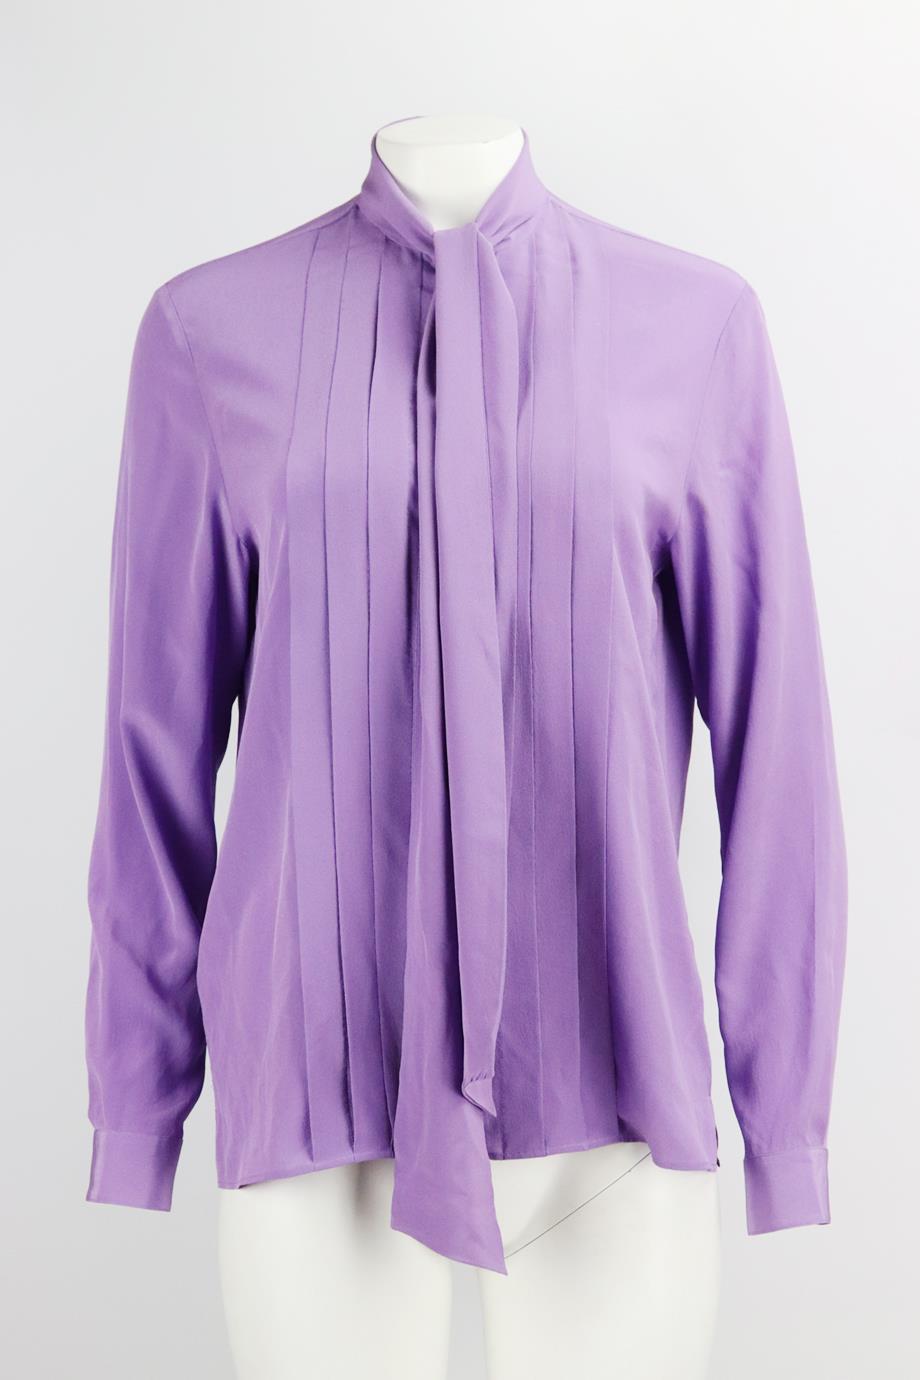 GUCCI PUSSY BOW SILK BLOUSE IT 38 UK 6